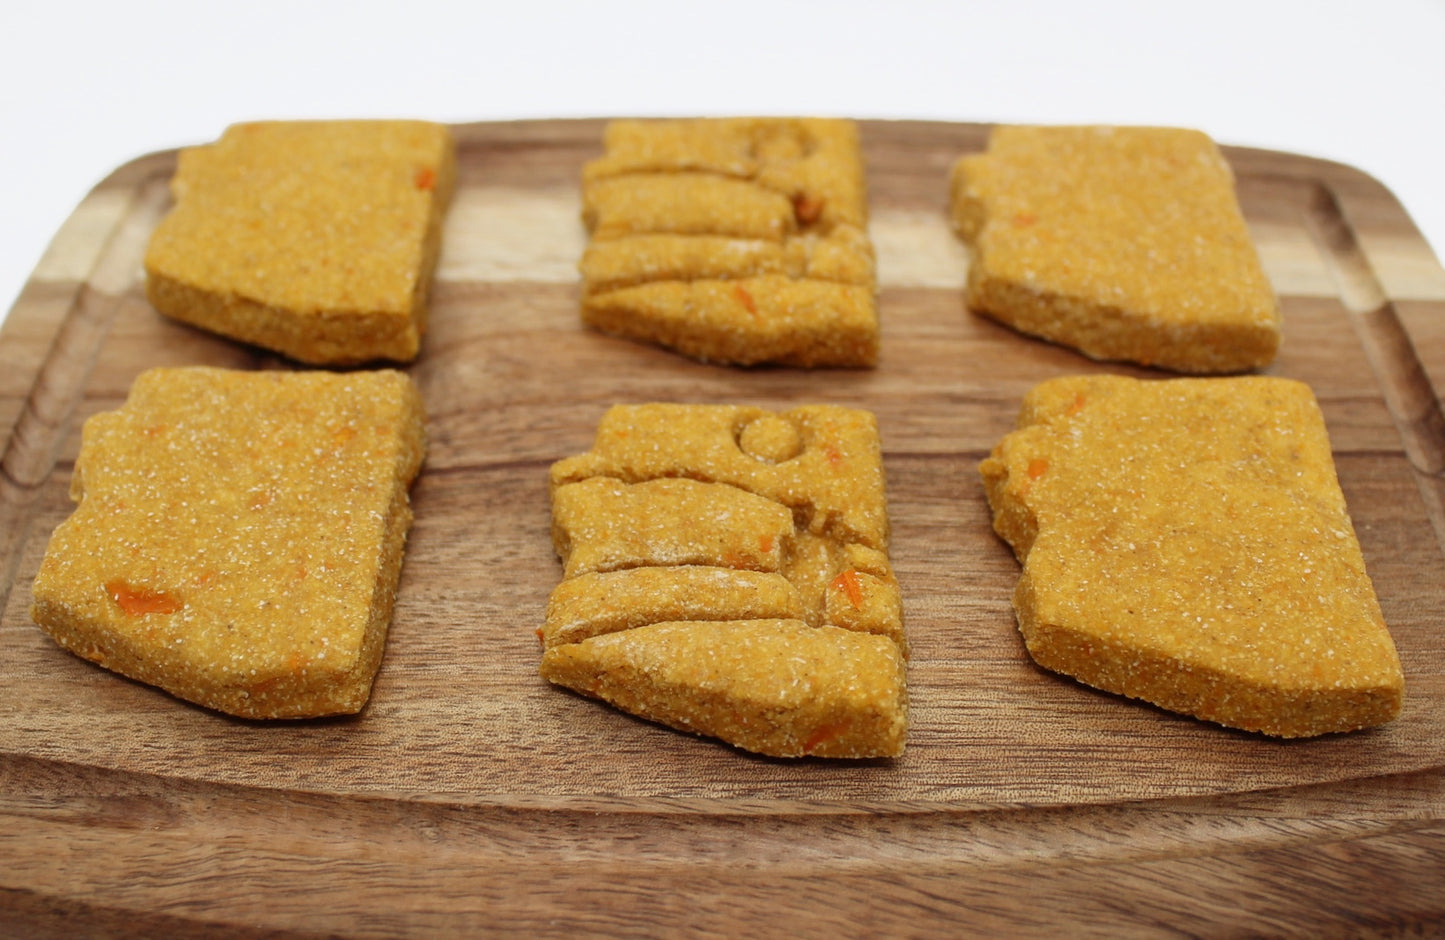 Six sweet potato and carrot flavored dog biscuits in the shape of the state of Arizona displayed on a cutting board. Two biscuits have a stamp of a desert scene which show a sun, cactus and mountains. 